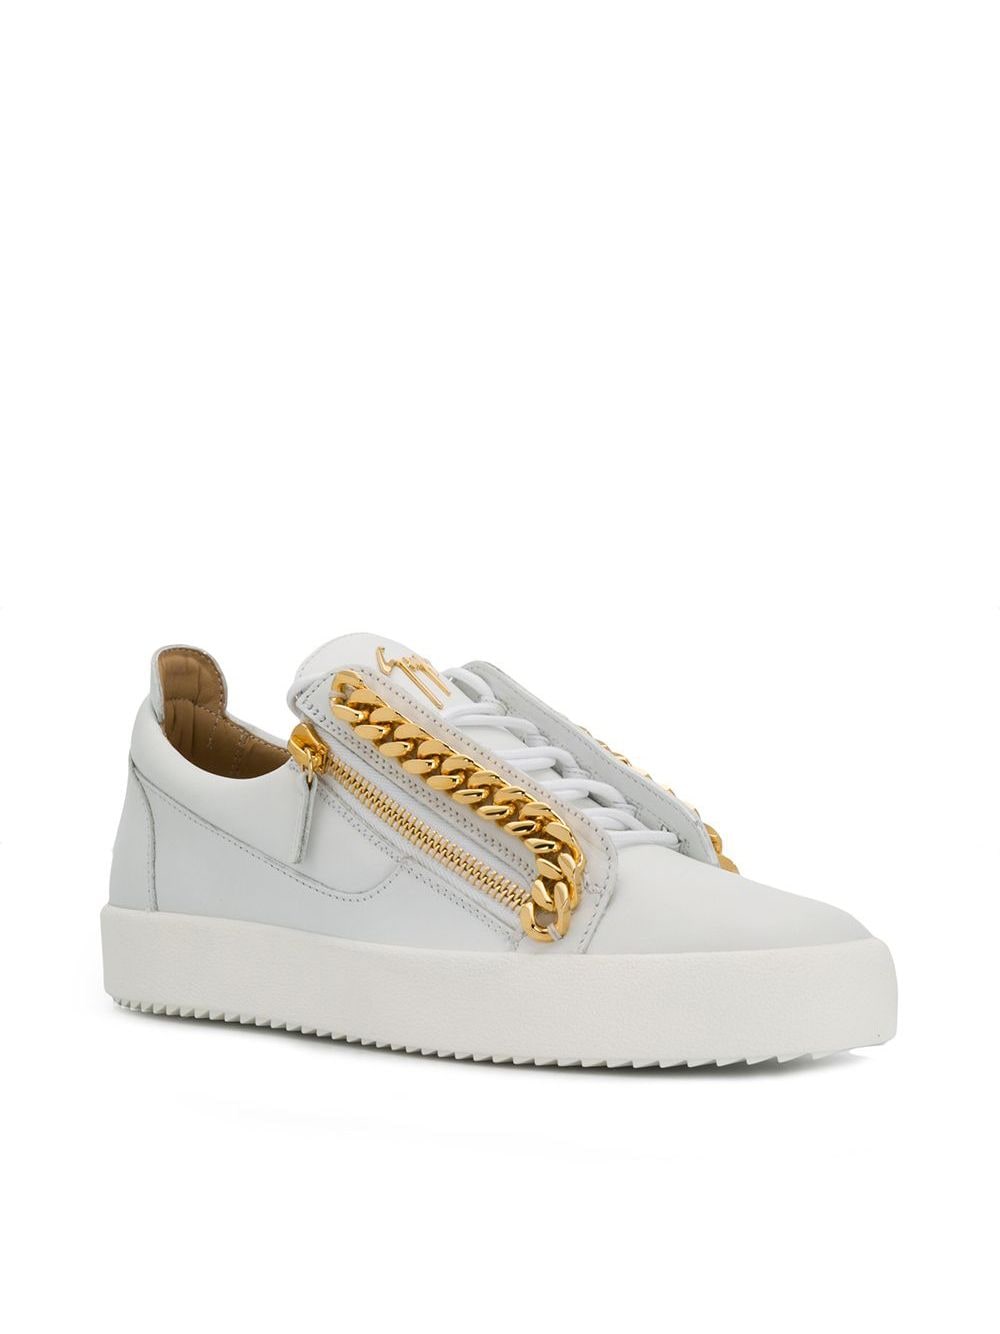 Shop Giuseppe Zanotti Frankie chain sneakers with Express Delivery ...